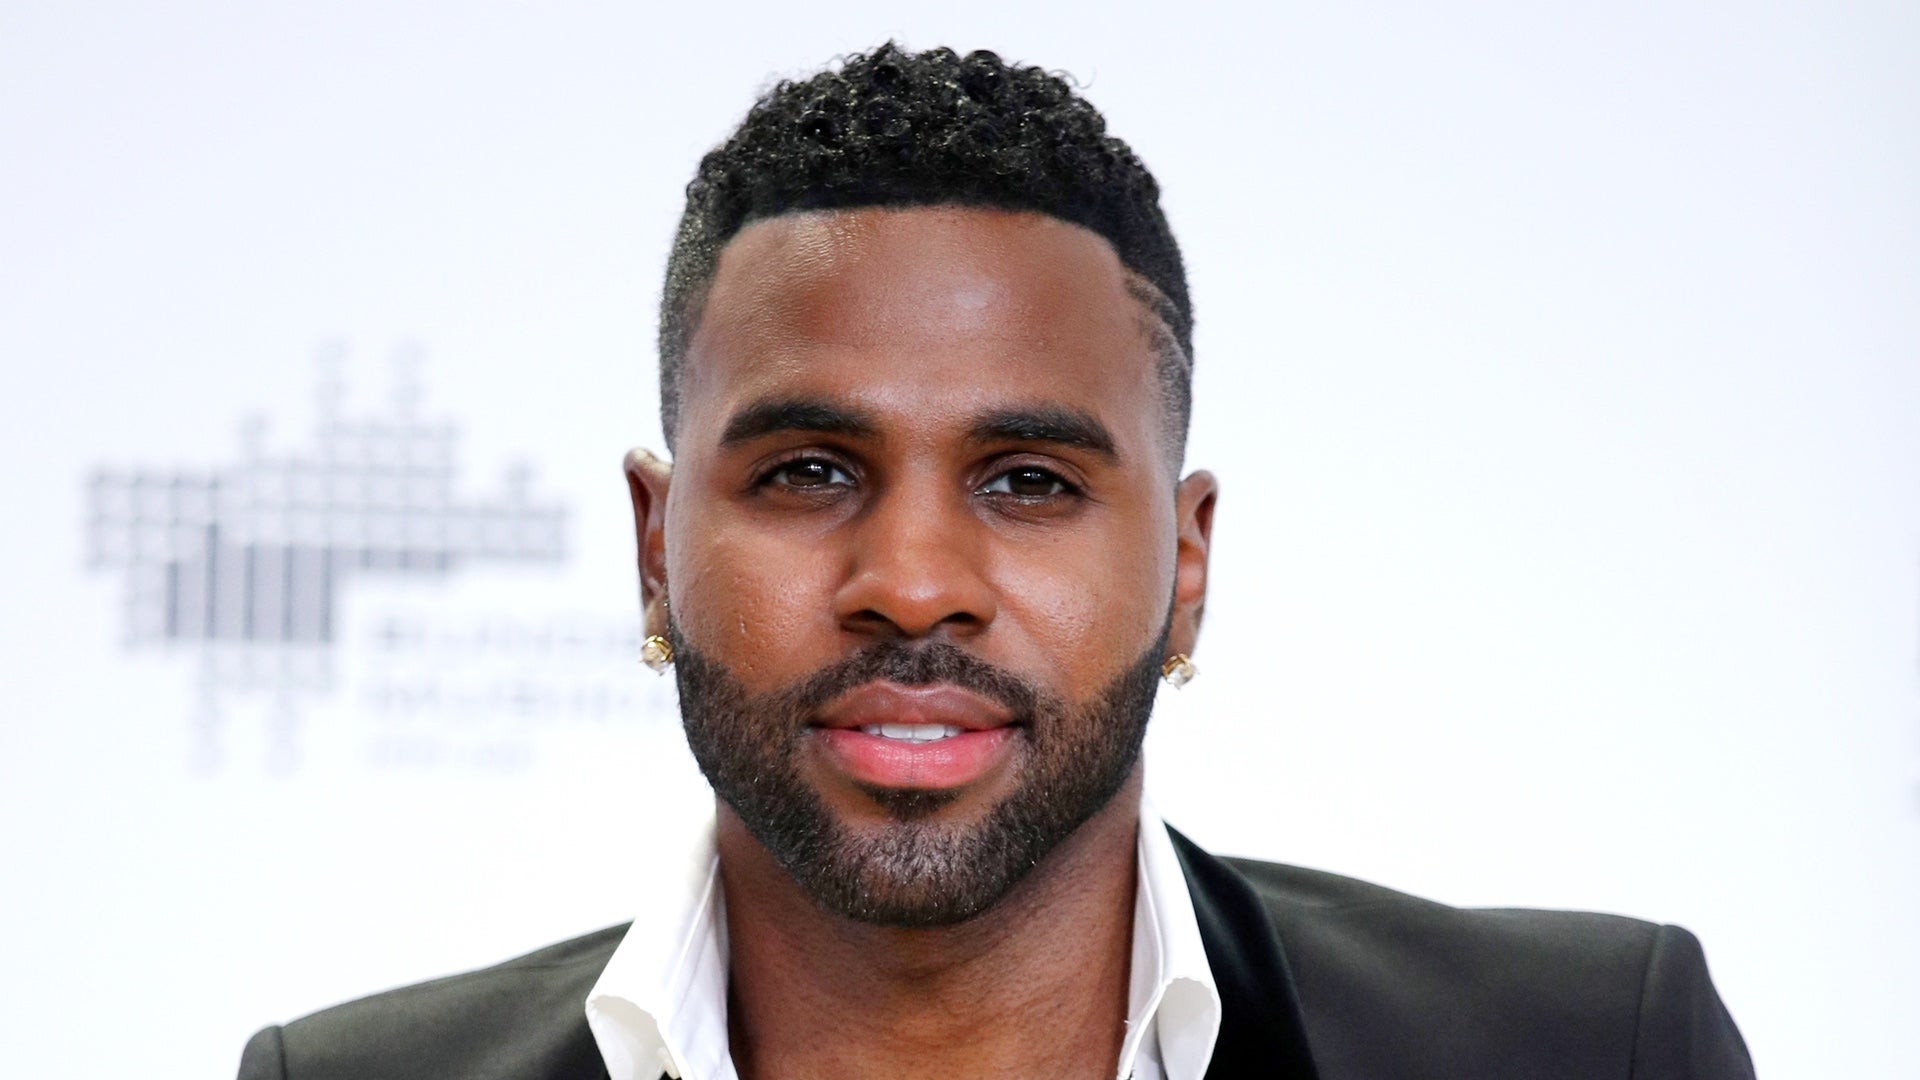 Jason Derulo Shaved Off His Eyebrow And It Was Painful To Watch